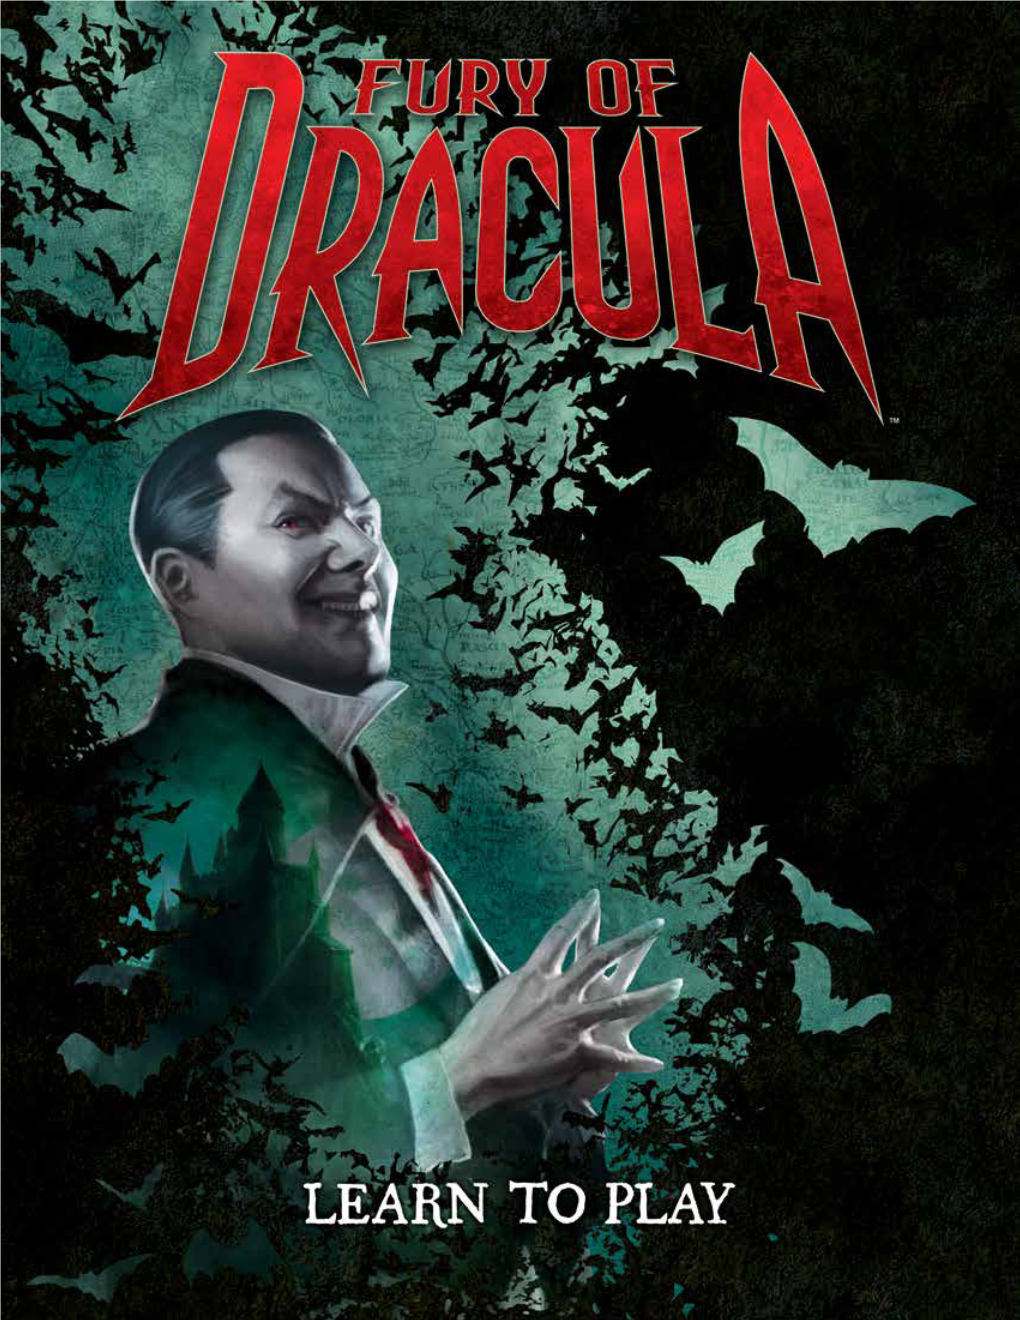 Learn to Play Booklet Is to Teach New Players How to Play Fury of Dracula